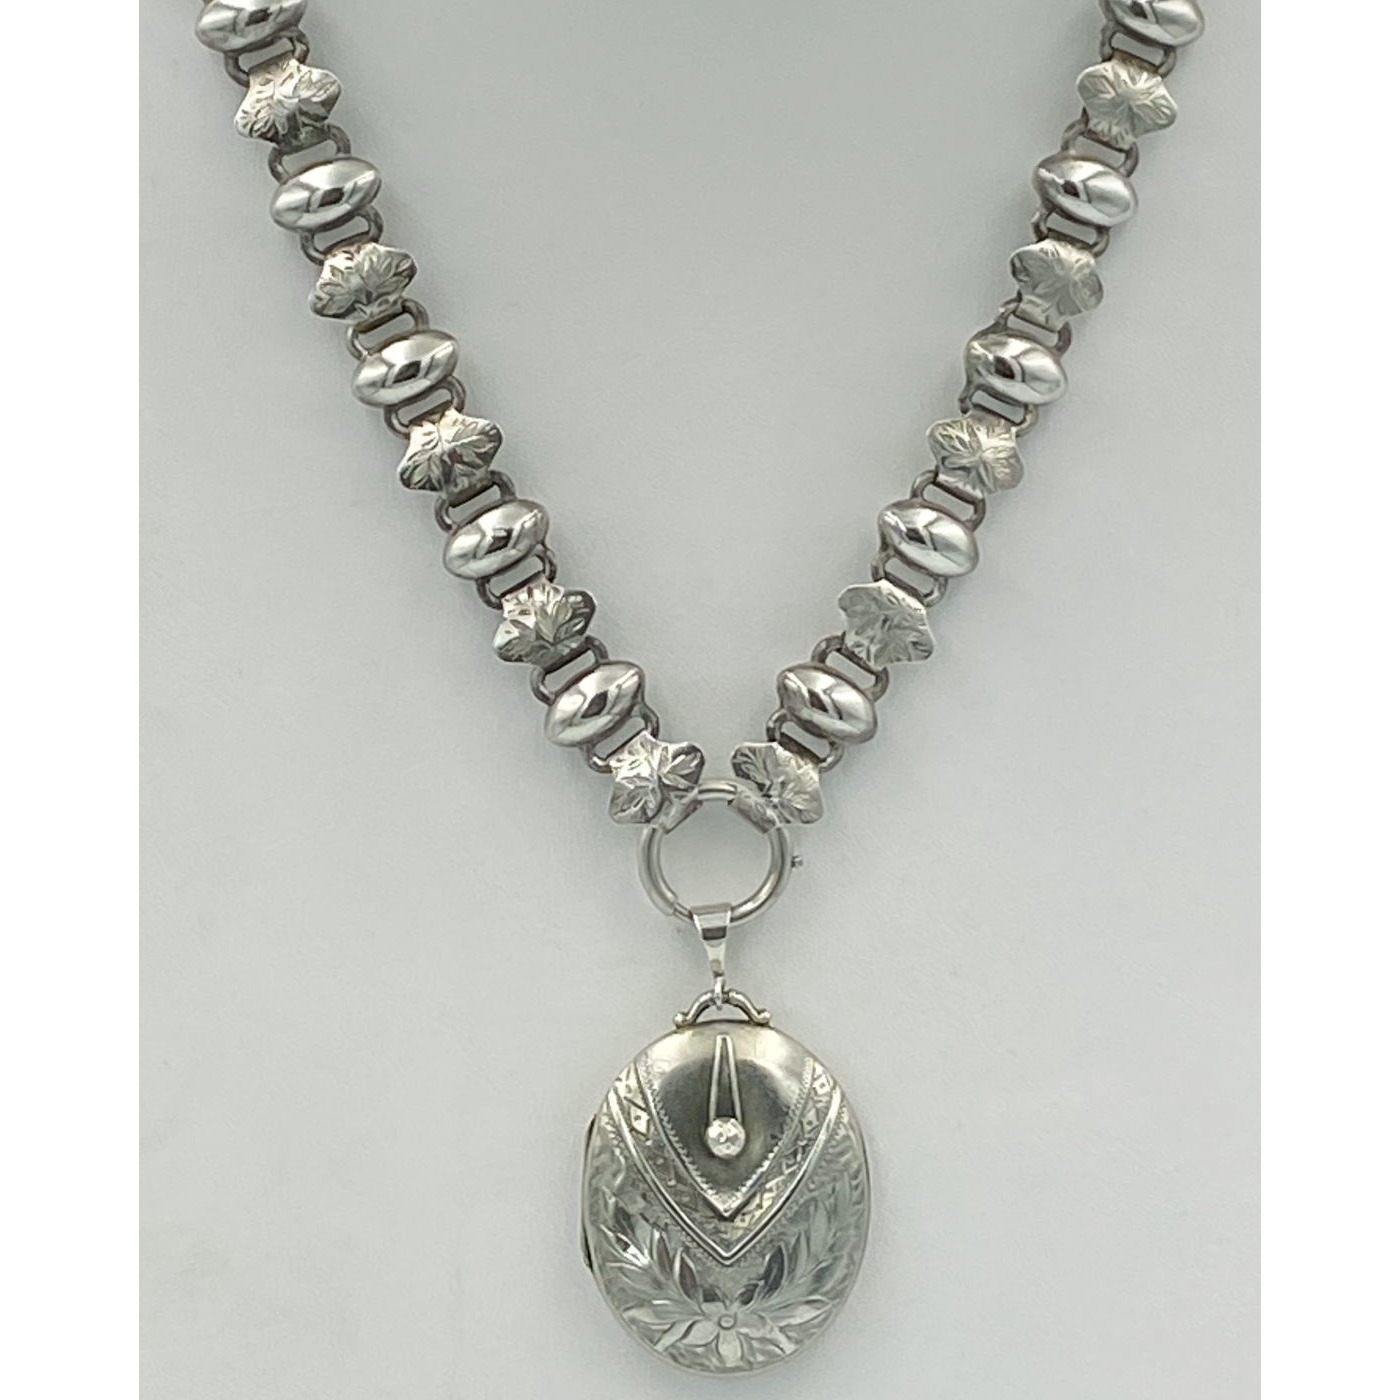 18" Wonderful Domed Diamond-Shaped Alternating Engraved and Plain Link Antique English Silver Chain